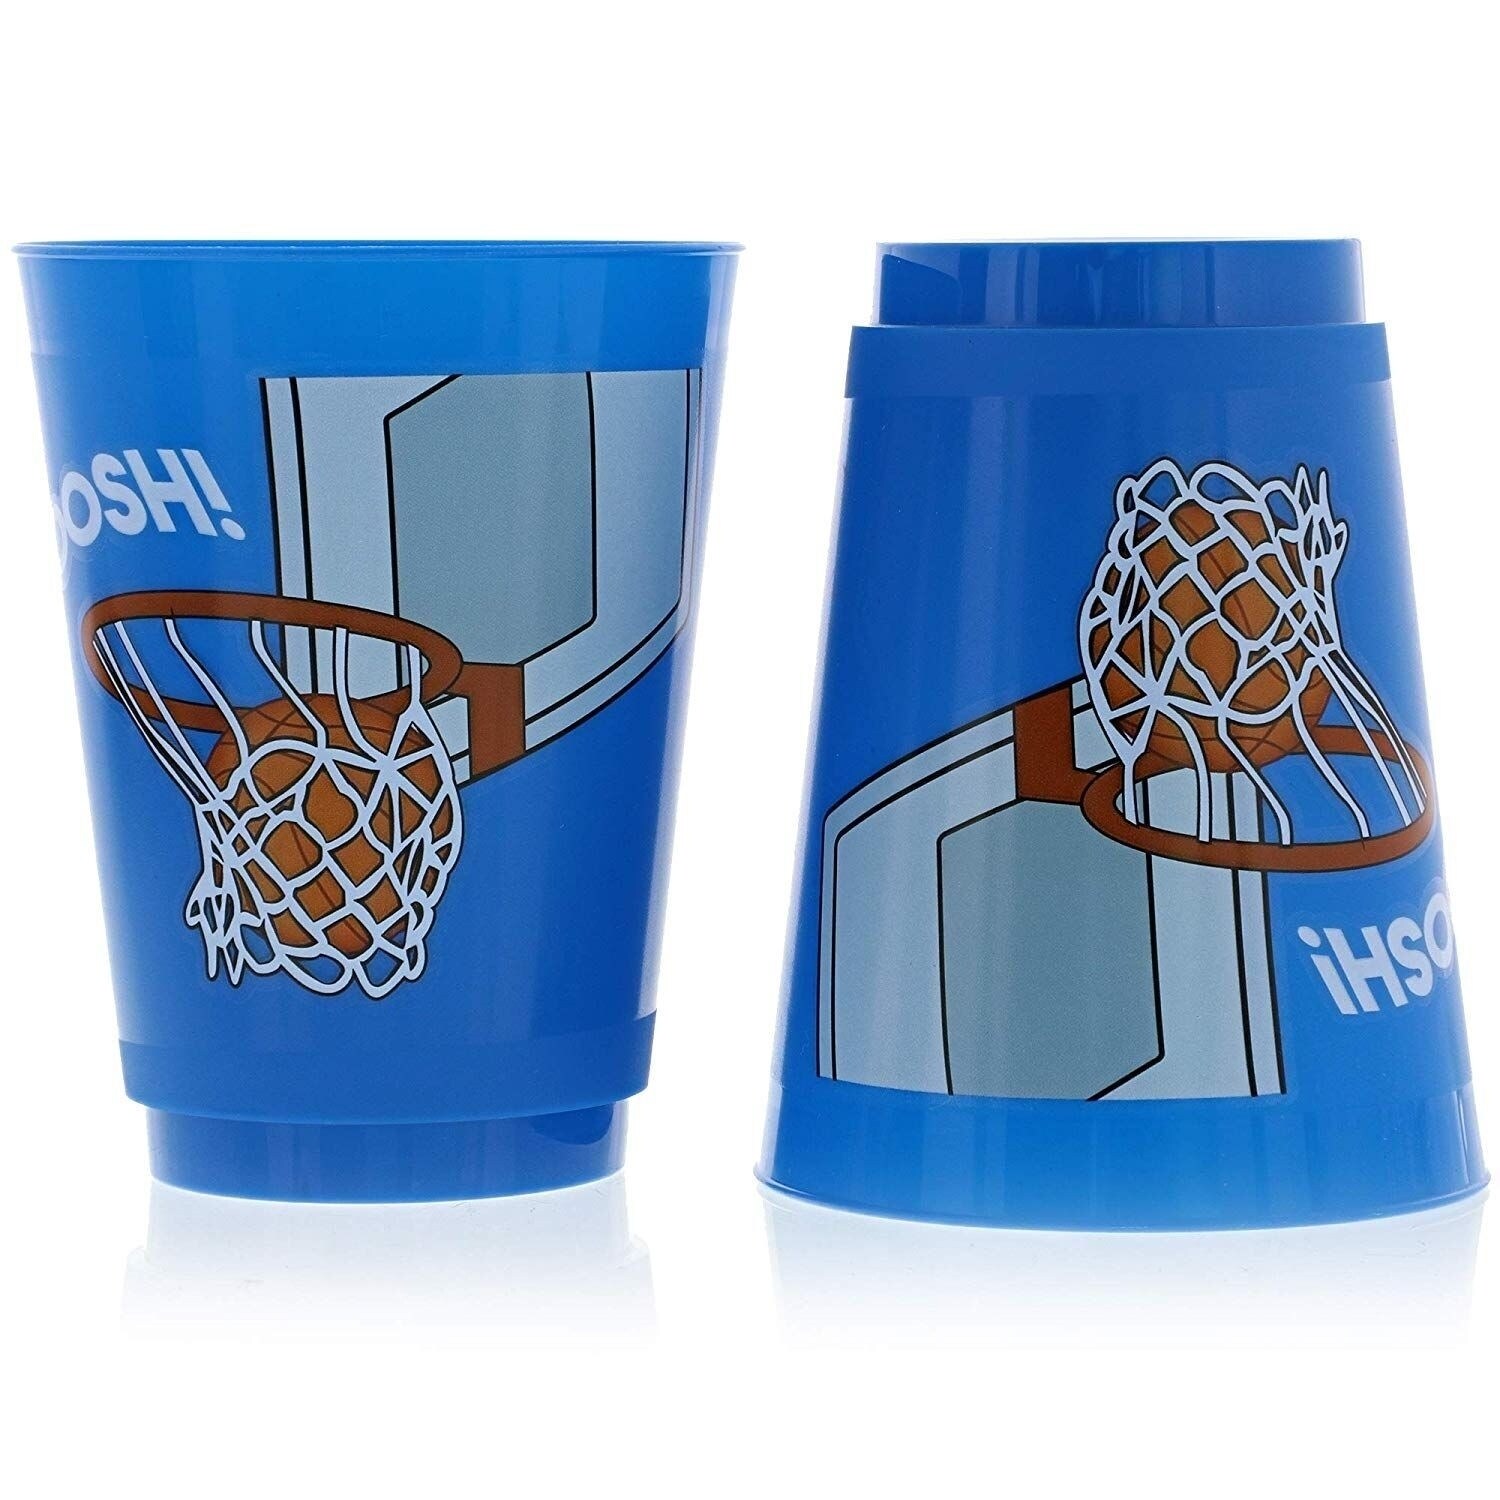 https://ak1.ostkcdn.com/images/products/31094292/16-Pack-Plastic-16-oz-Party-Cups-Basketball-Reusable-Tumblers-for-Kids-Birthday-Blue-4c31894d-e68c-44c3-9572-736171332011.jpg